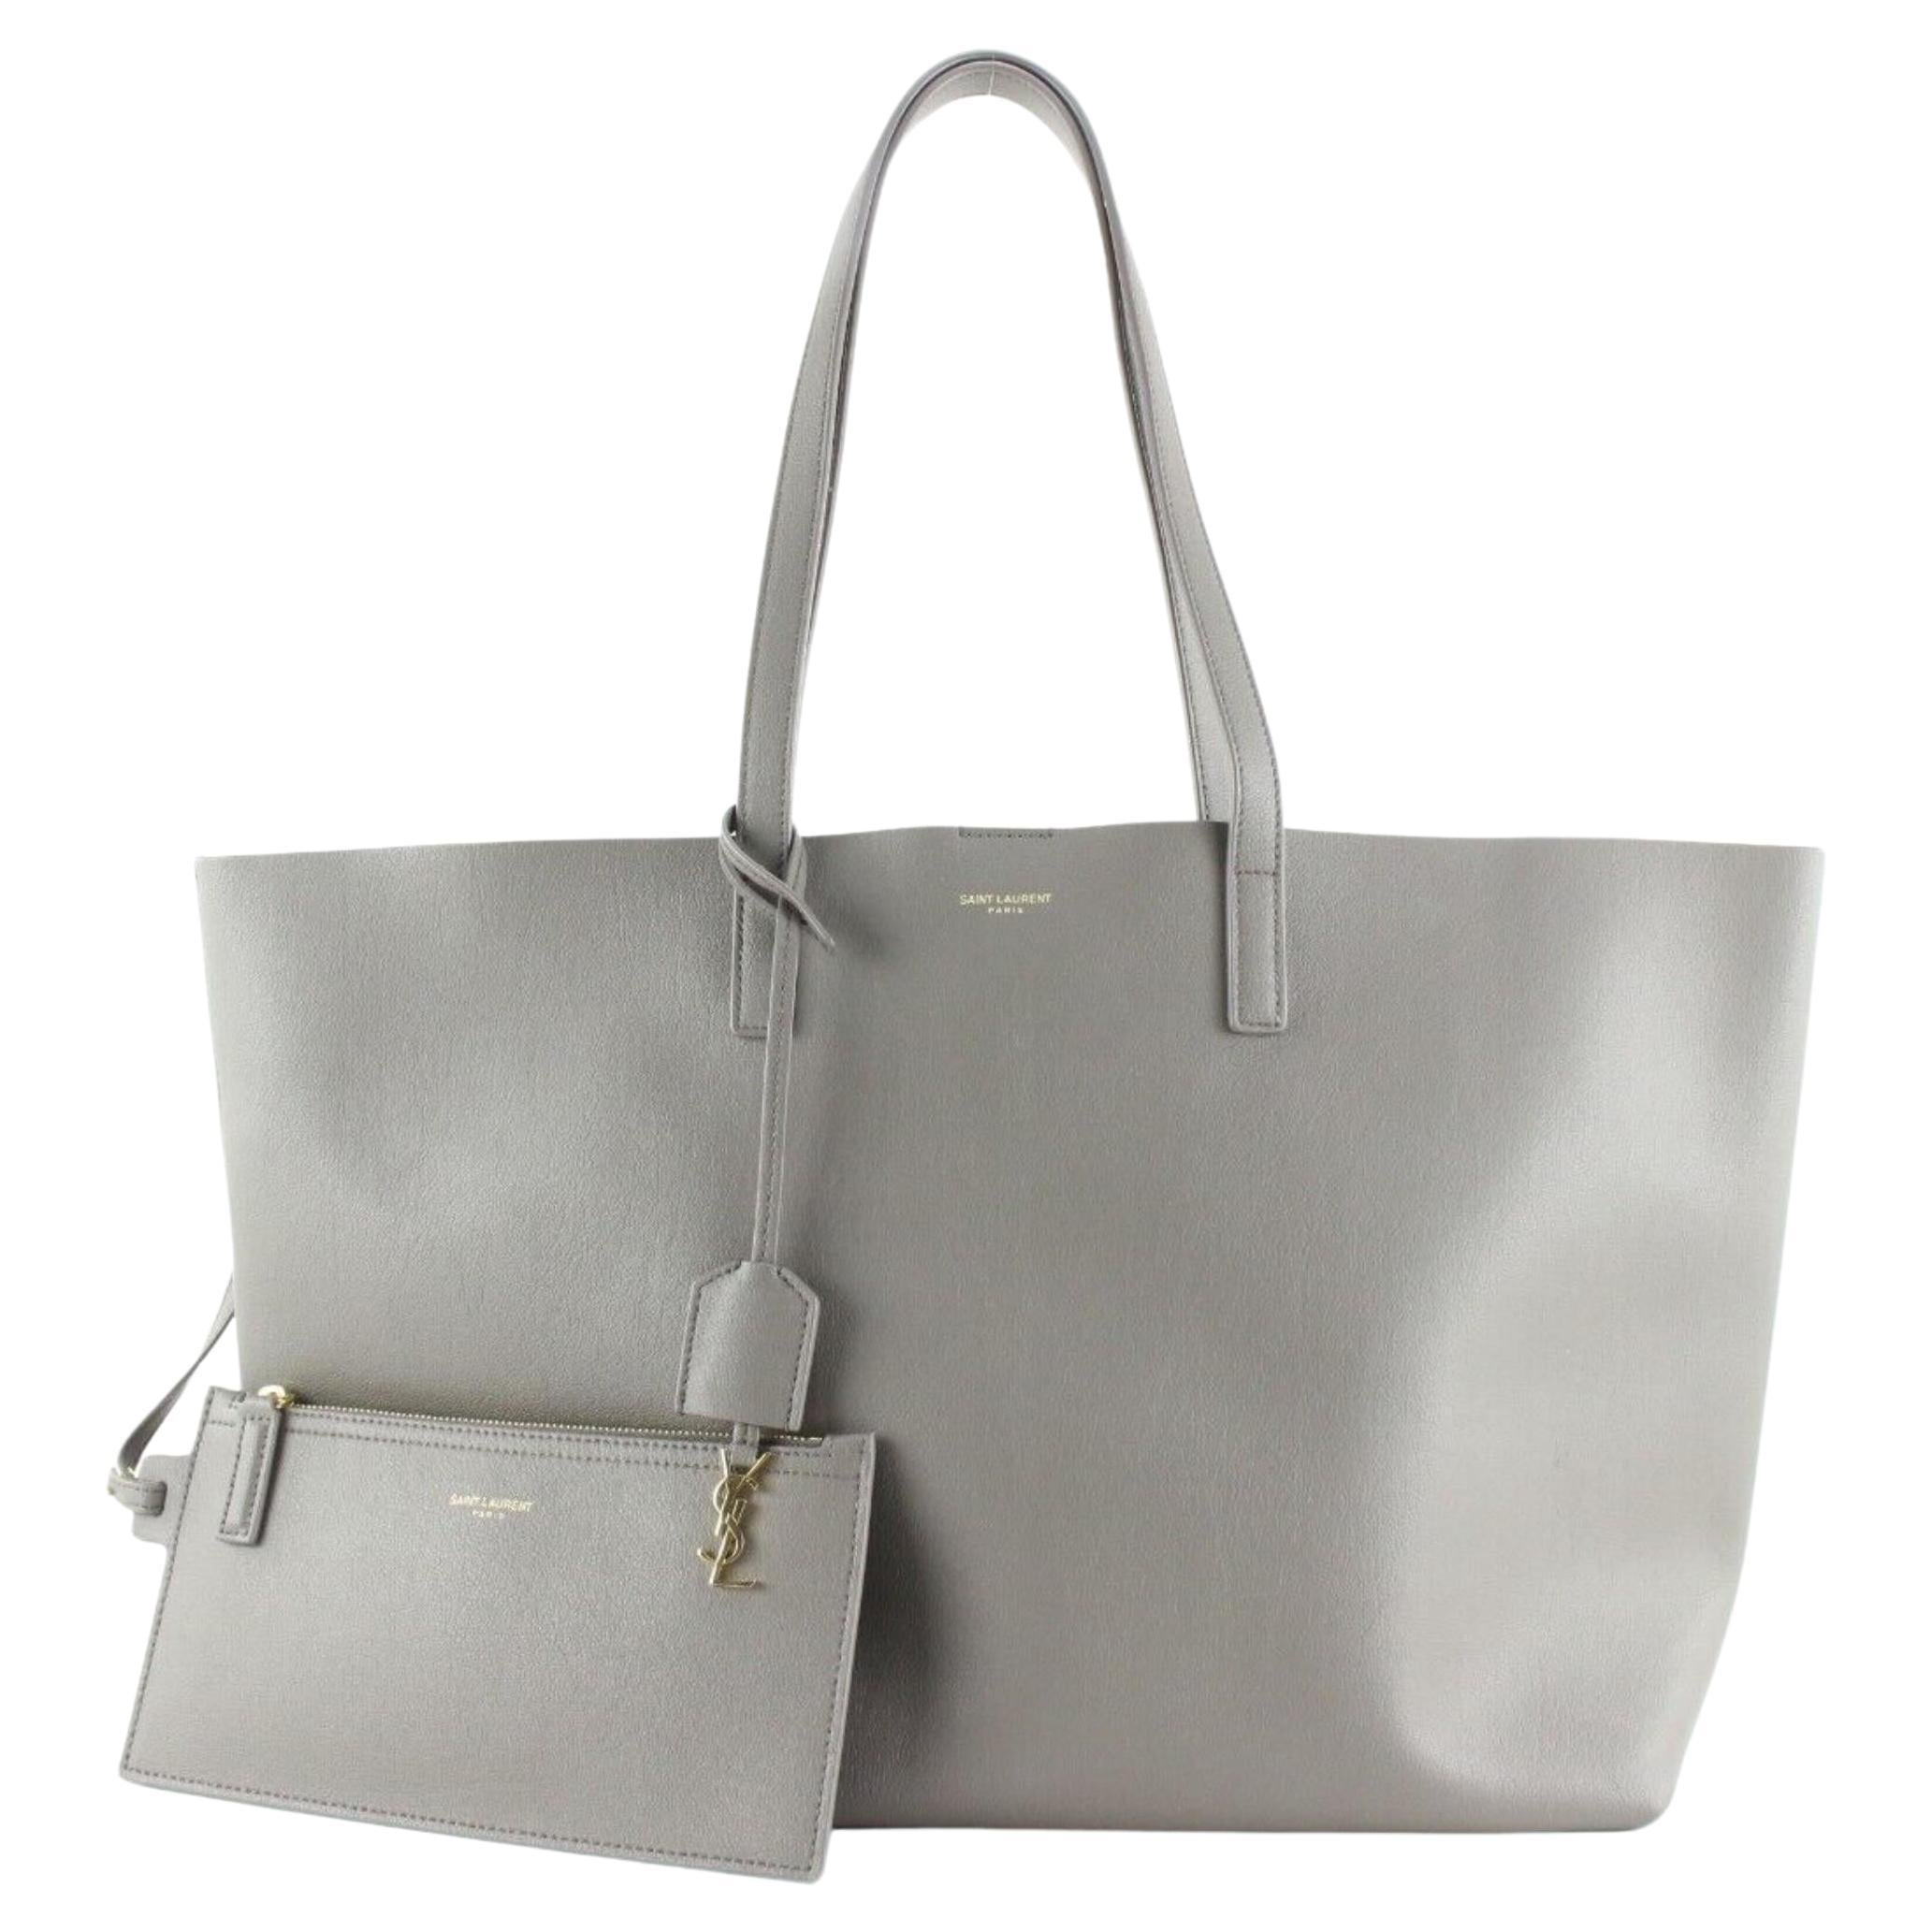 Saint Laurent Grey Calfskin East West Shopping Tote with Pouch 1YSL0412C